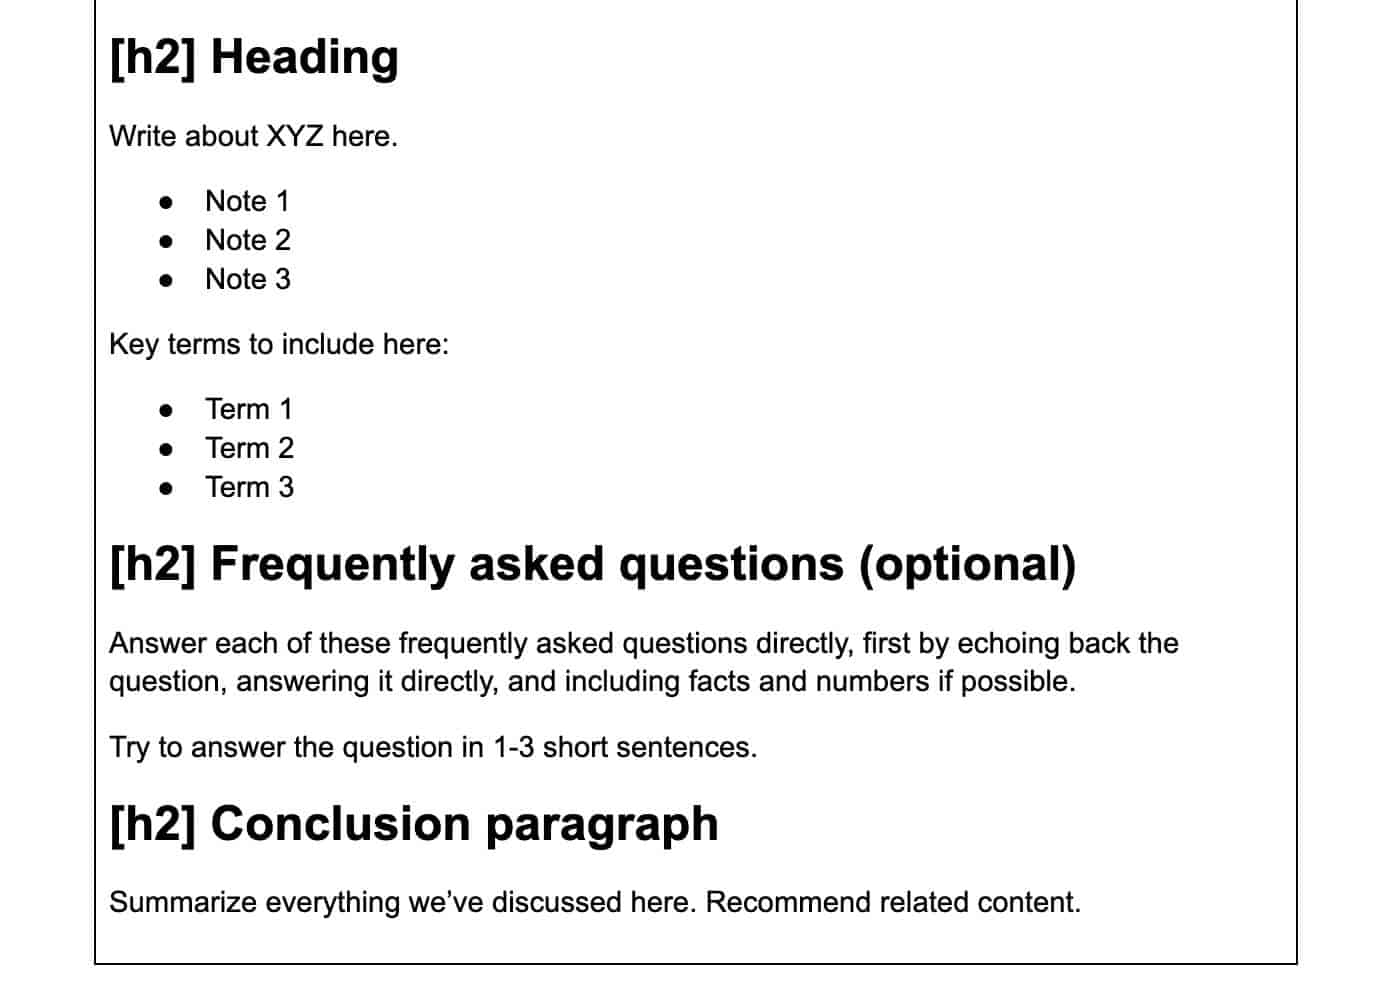 Content Outline Section